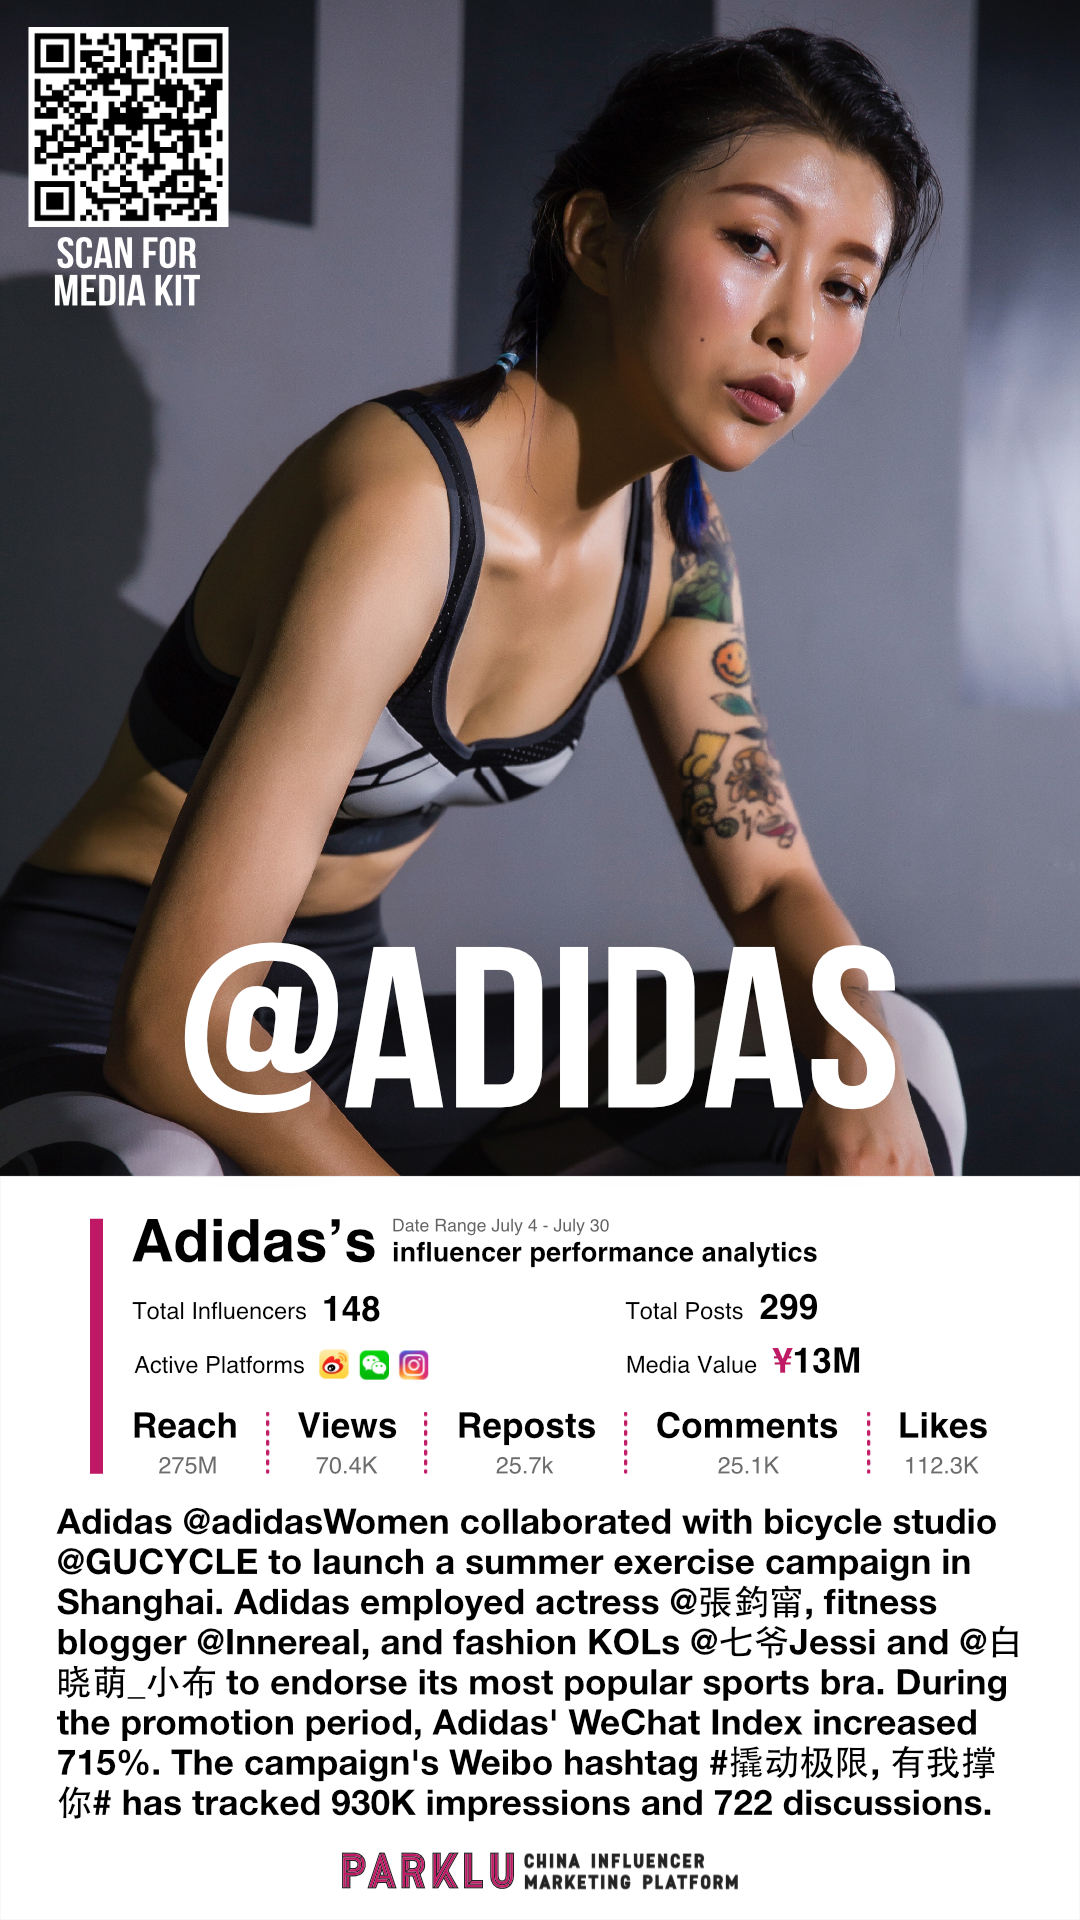 Adidas x GuCycle Campaign Features Fitness Bloggers